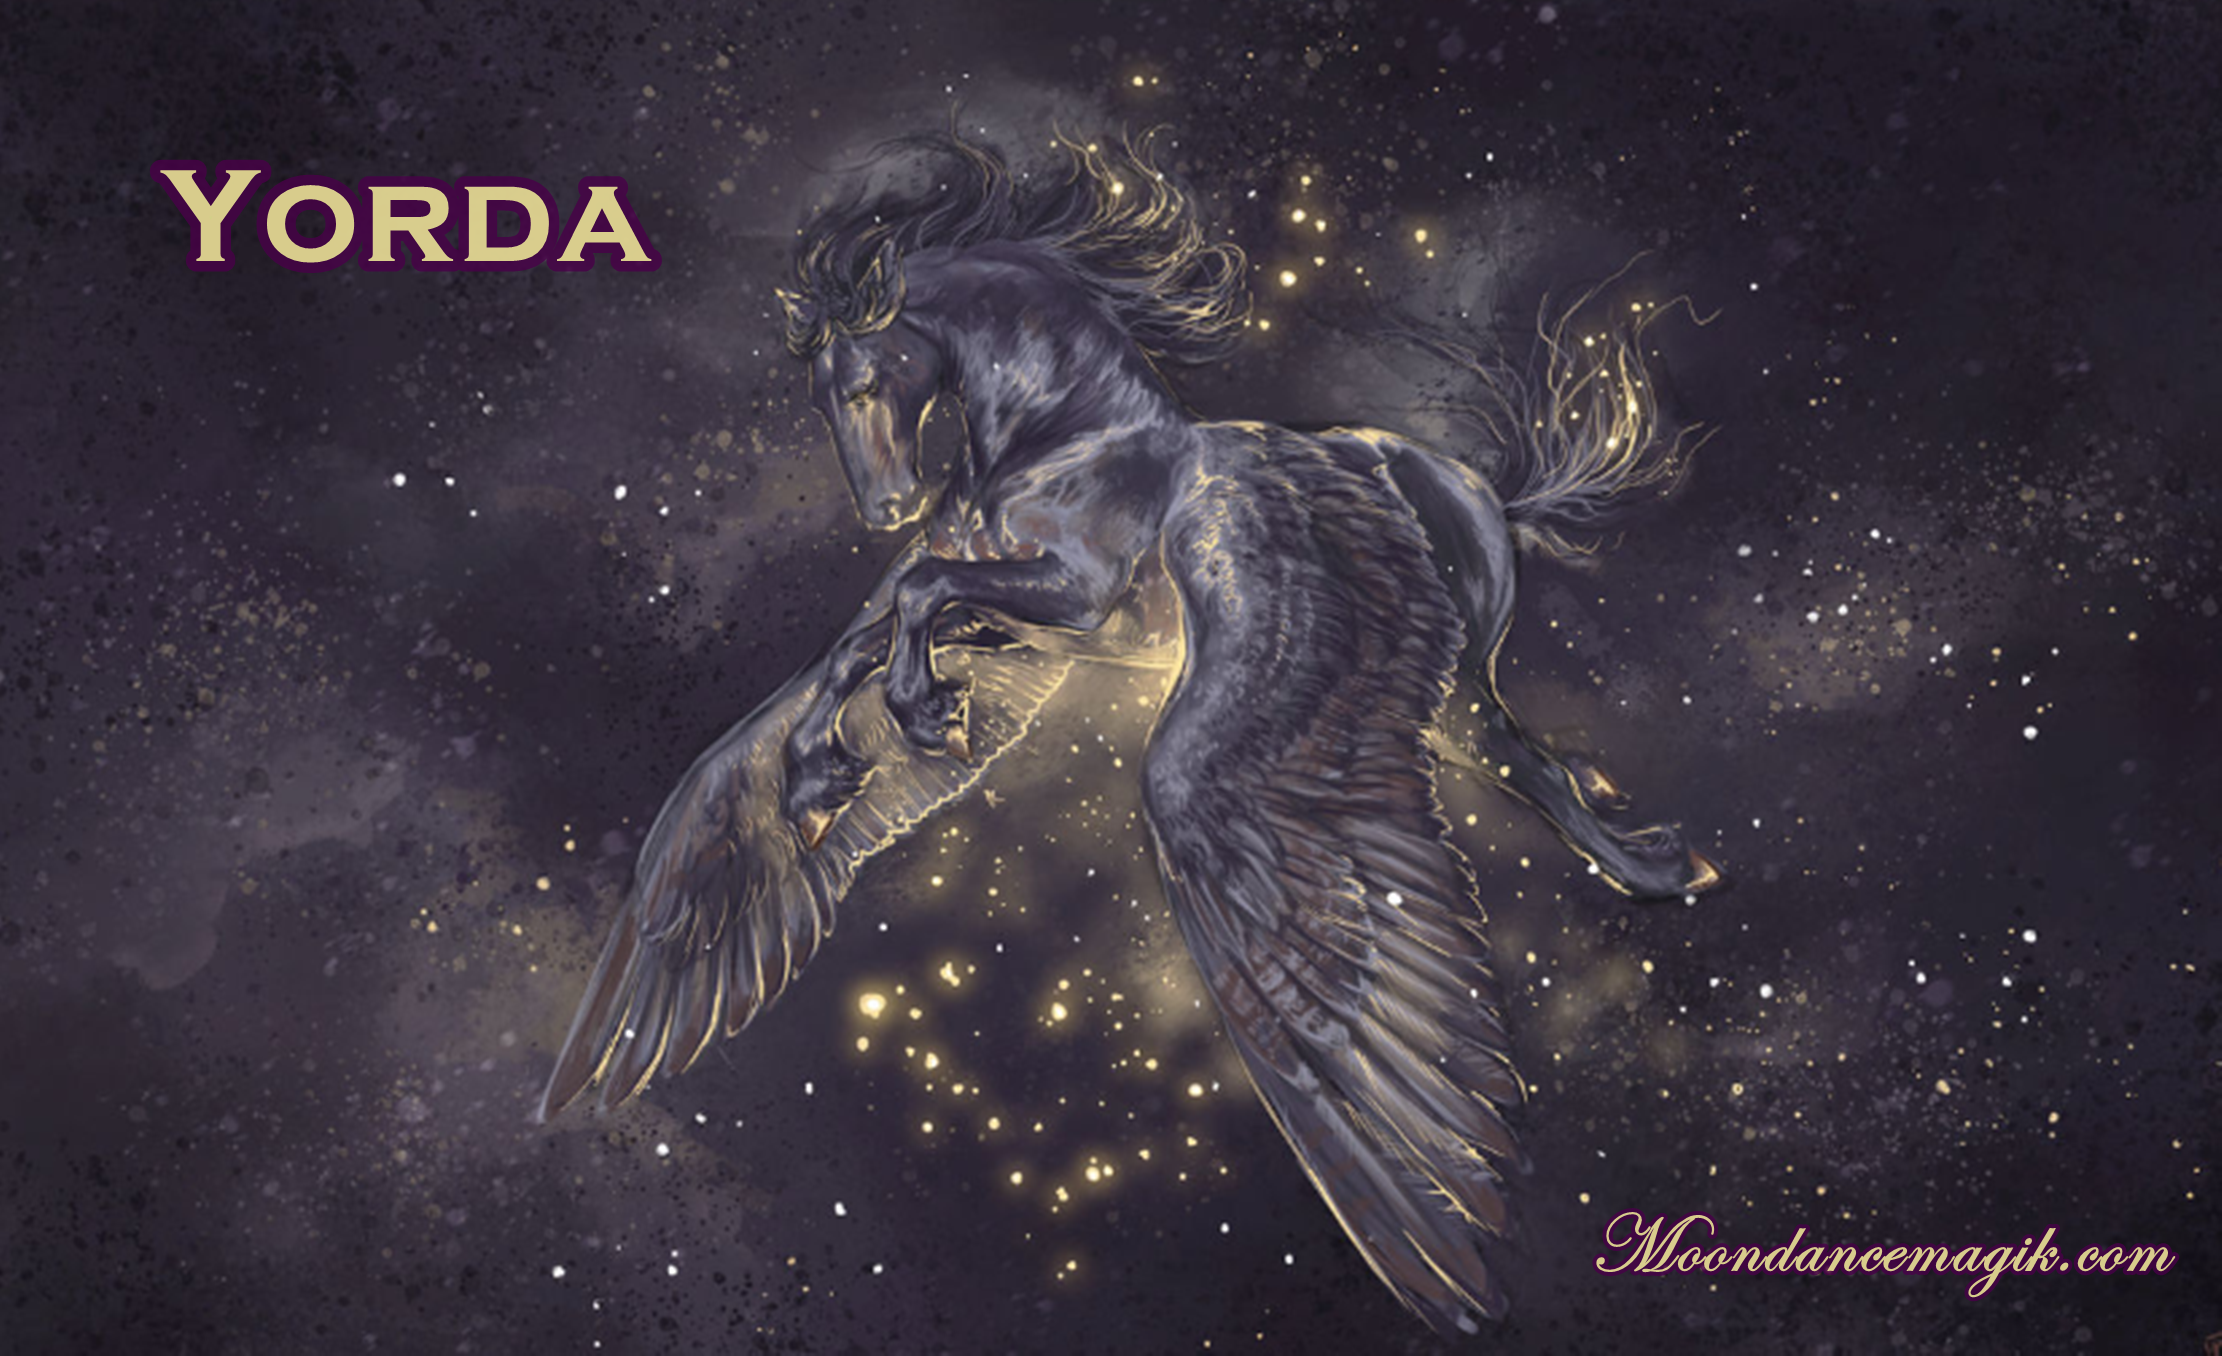 Yorda the Pegasus Fairy - Yarnocht Star Spirit Enhances Your Odds at all Your Goals x 100 - From The 4700